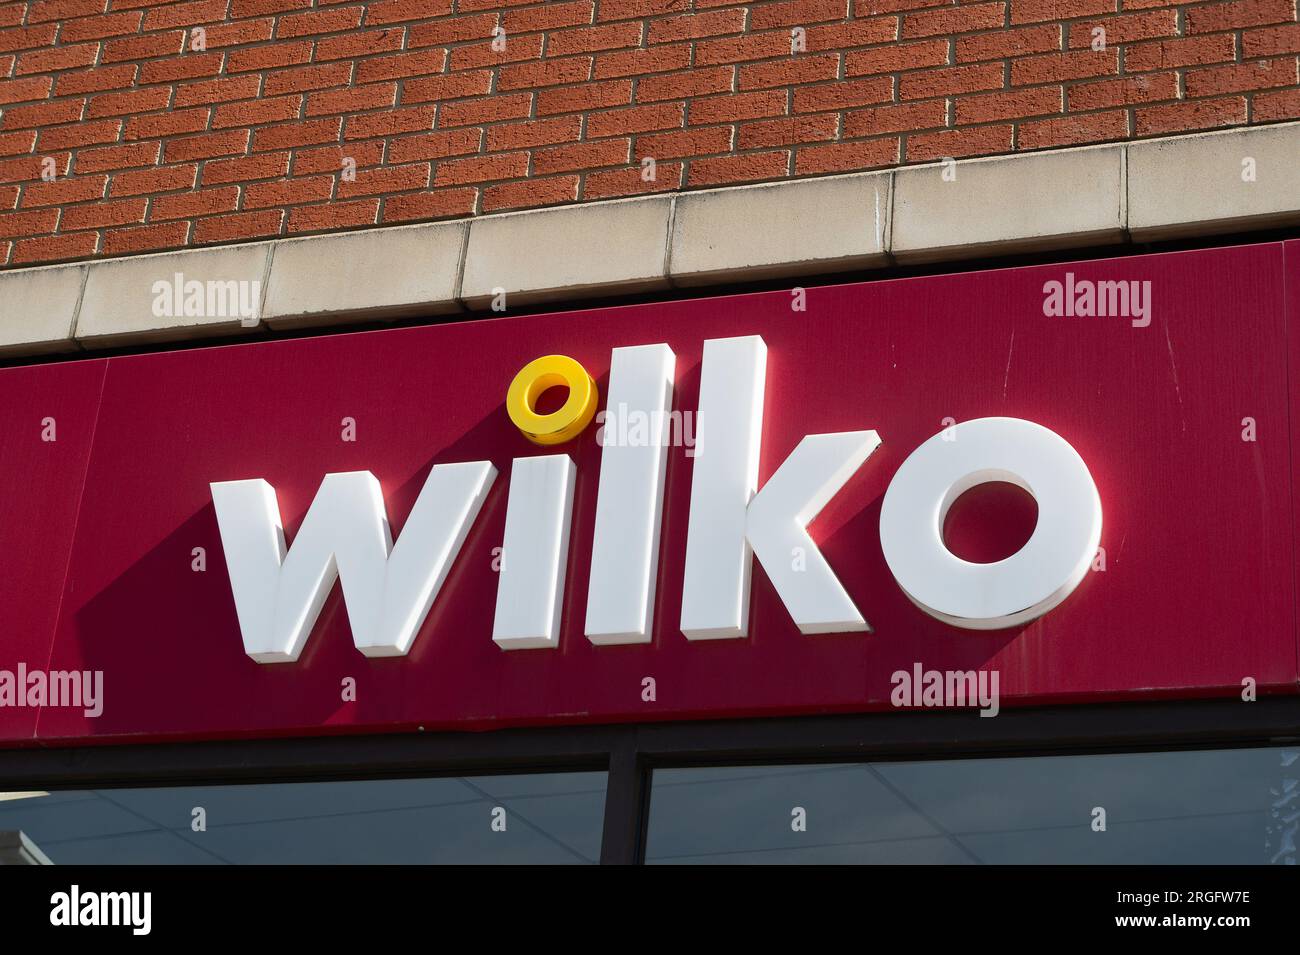 Slough, Berkshire, UK. 9th August, 2023. A Wilko store in Slough High Street, Berkshire. Private equity firm, Gordon Brothers, are said to be considering a potential rescue bid for the high street store Wilko. Sky News have reportedly been told that 'Gordon Brothers had expressed interest in partnering with other financial backers to inject £20m of equity and provide £50m in debt financing'. Wilko have filed a notice of intention to appoint administrators at the High Court putting 12,000 jobs at risk across the 400 Wilko stores in the UK. Some Wilko stores are having massive cut price sales bu Stock Photo